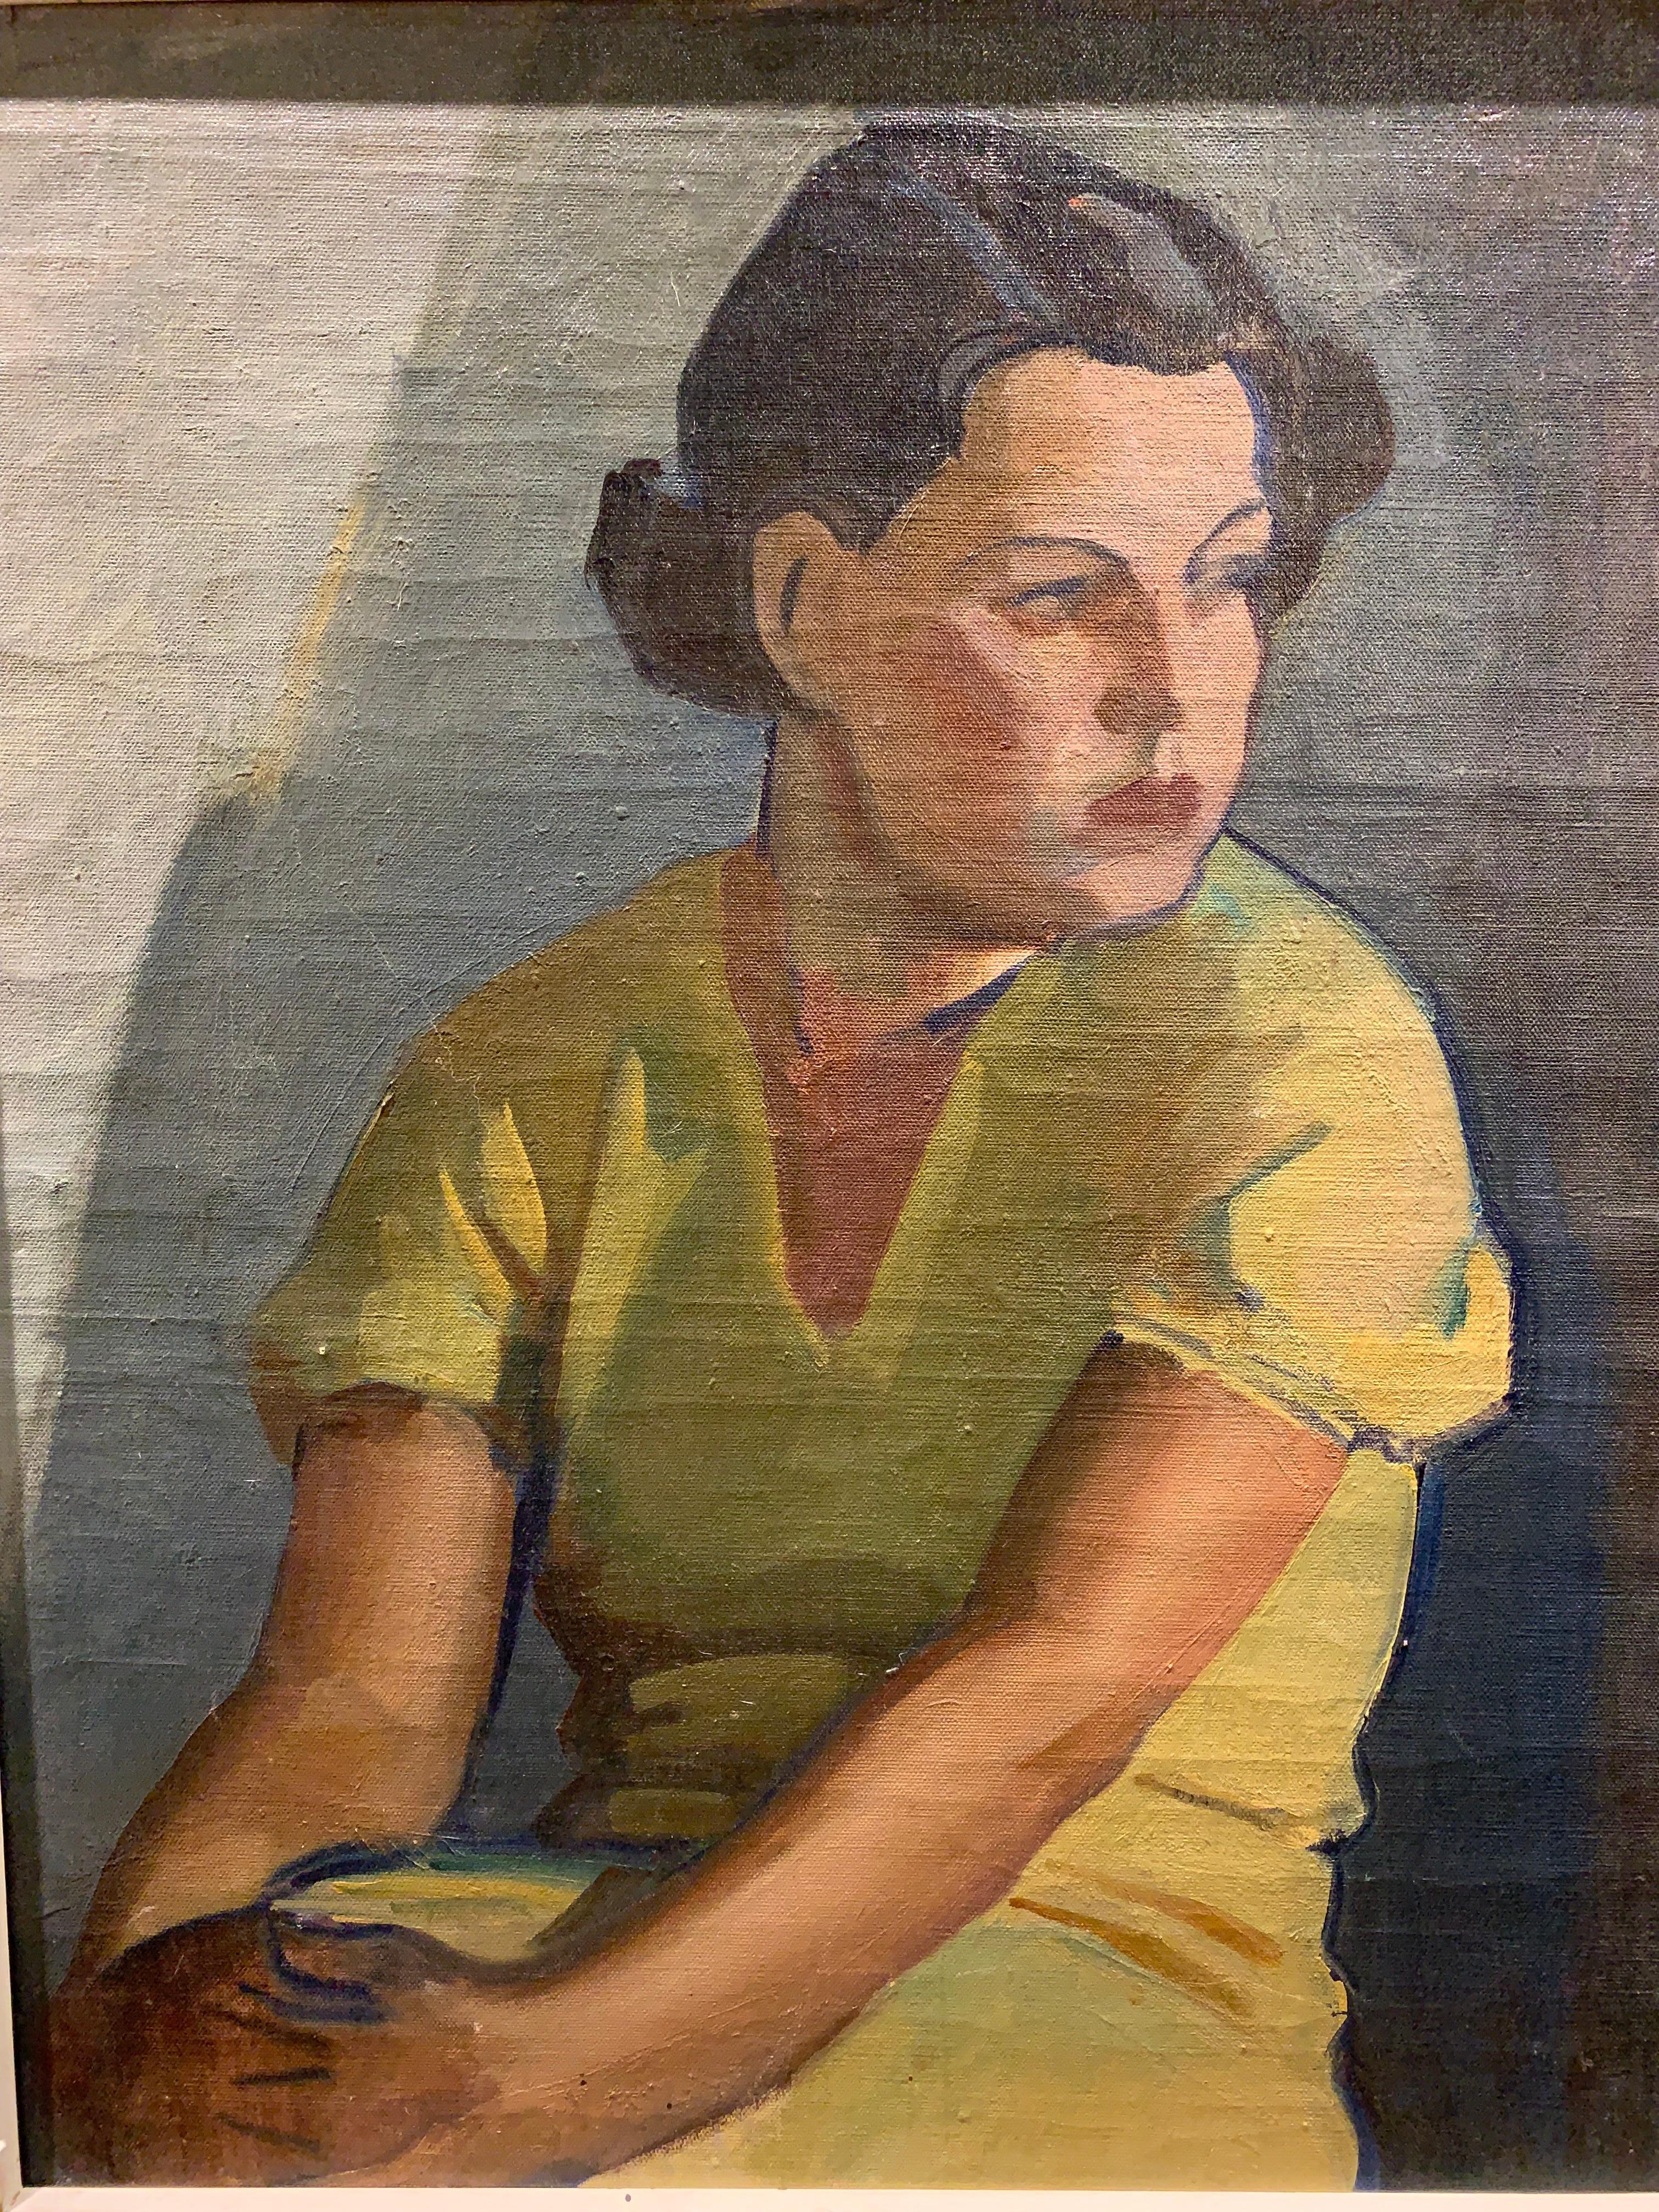 Art Deco 1930s Finnish 'Young Woman in a Yellow Dress' Oil on Canvas Artist Llmari Aalto For Sale